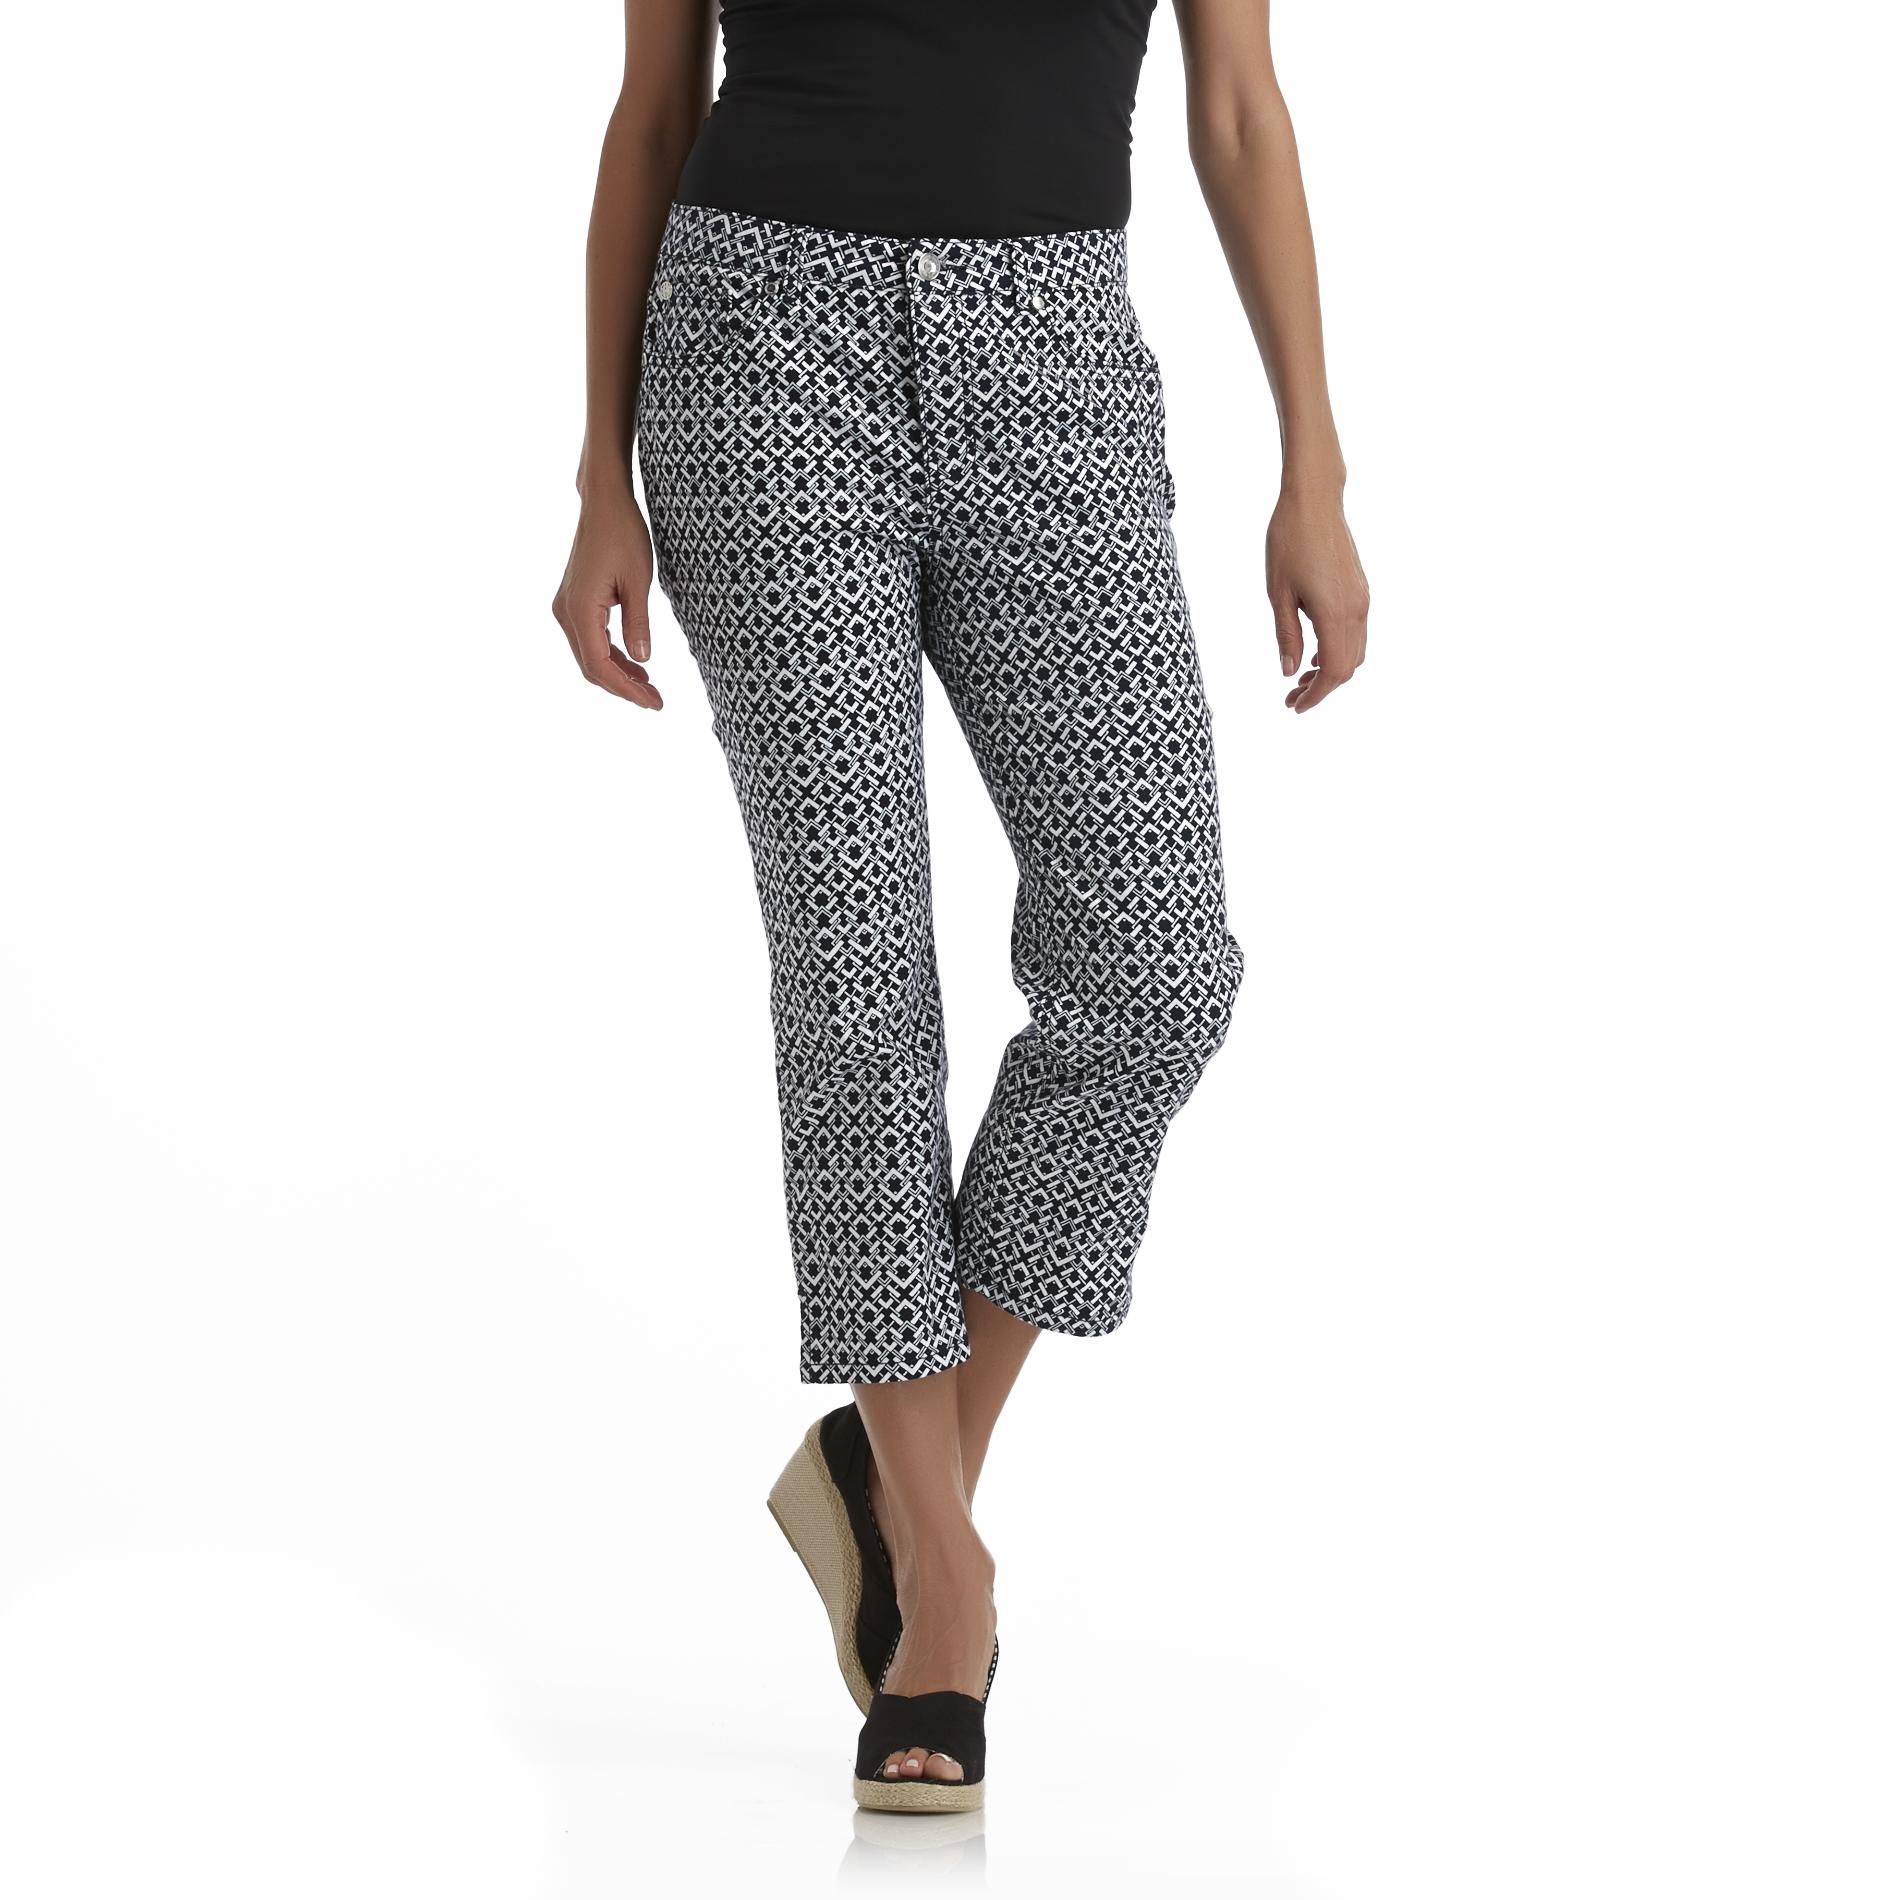 Jaclyn Smith Women's Printed Stretch Pants - Chain-Link-as seen in InStyle